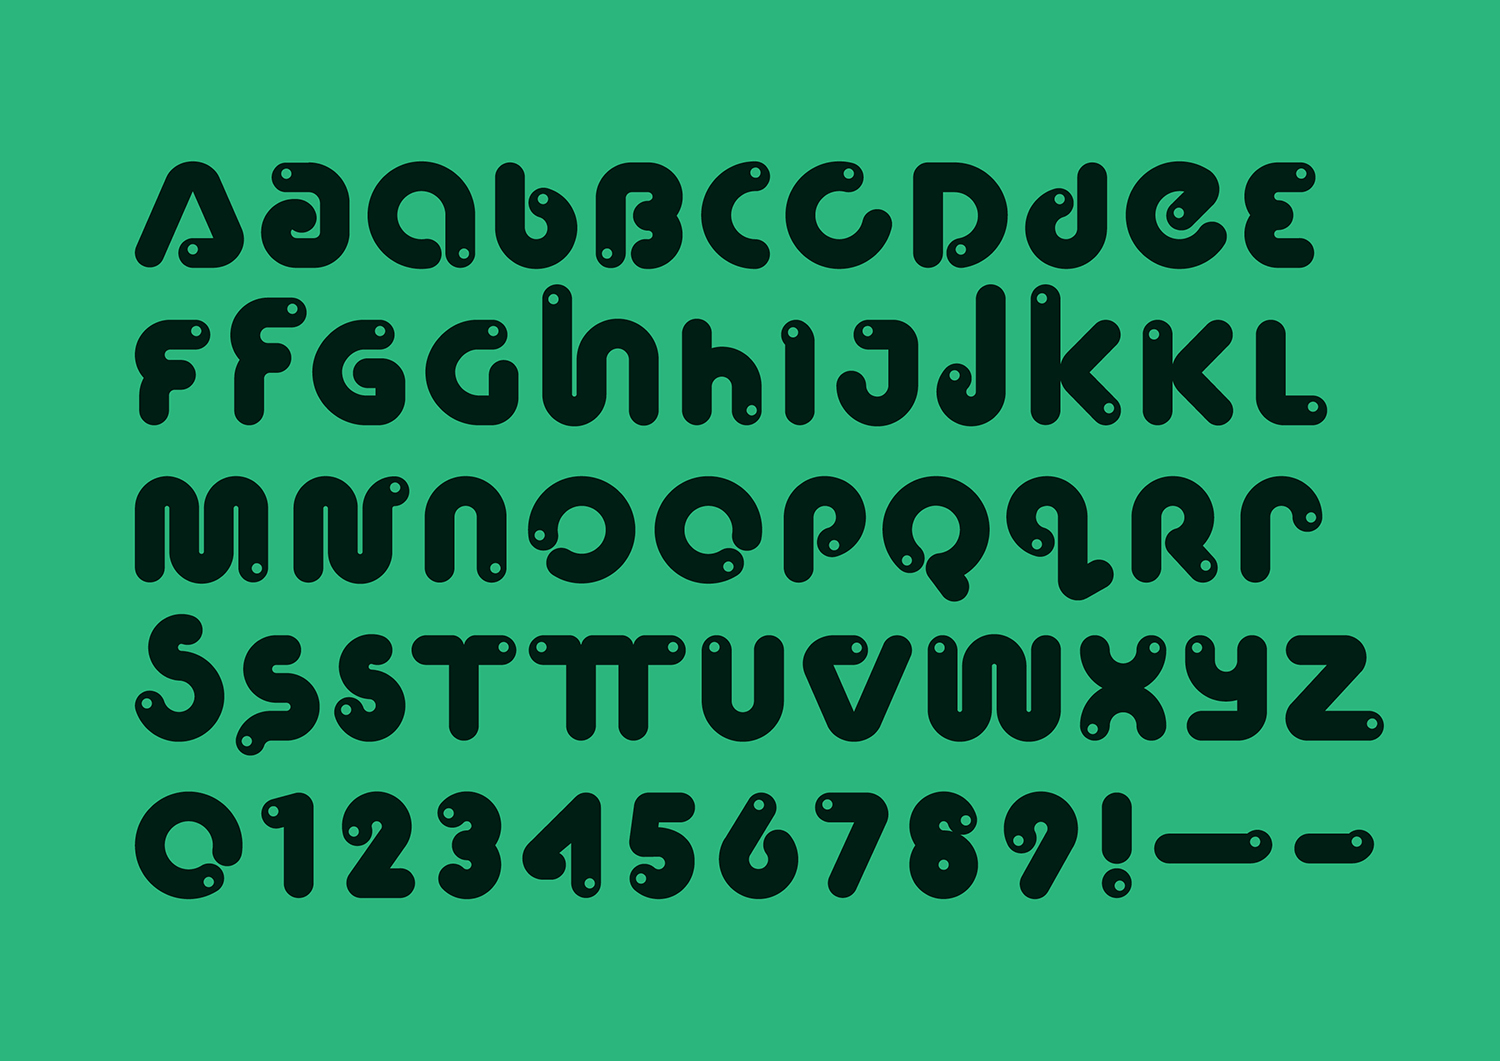 Custom typeface designed by Seachange for leading commercial compostable waste collection service We Compost